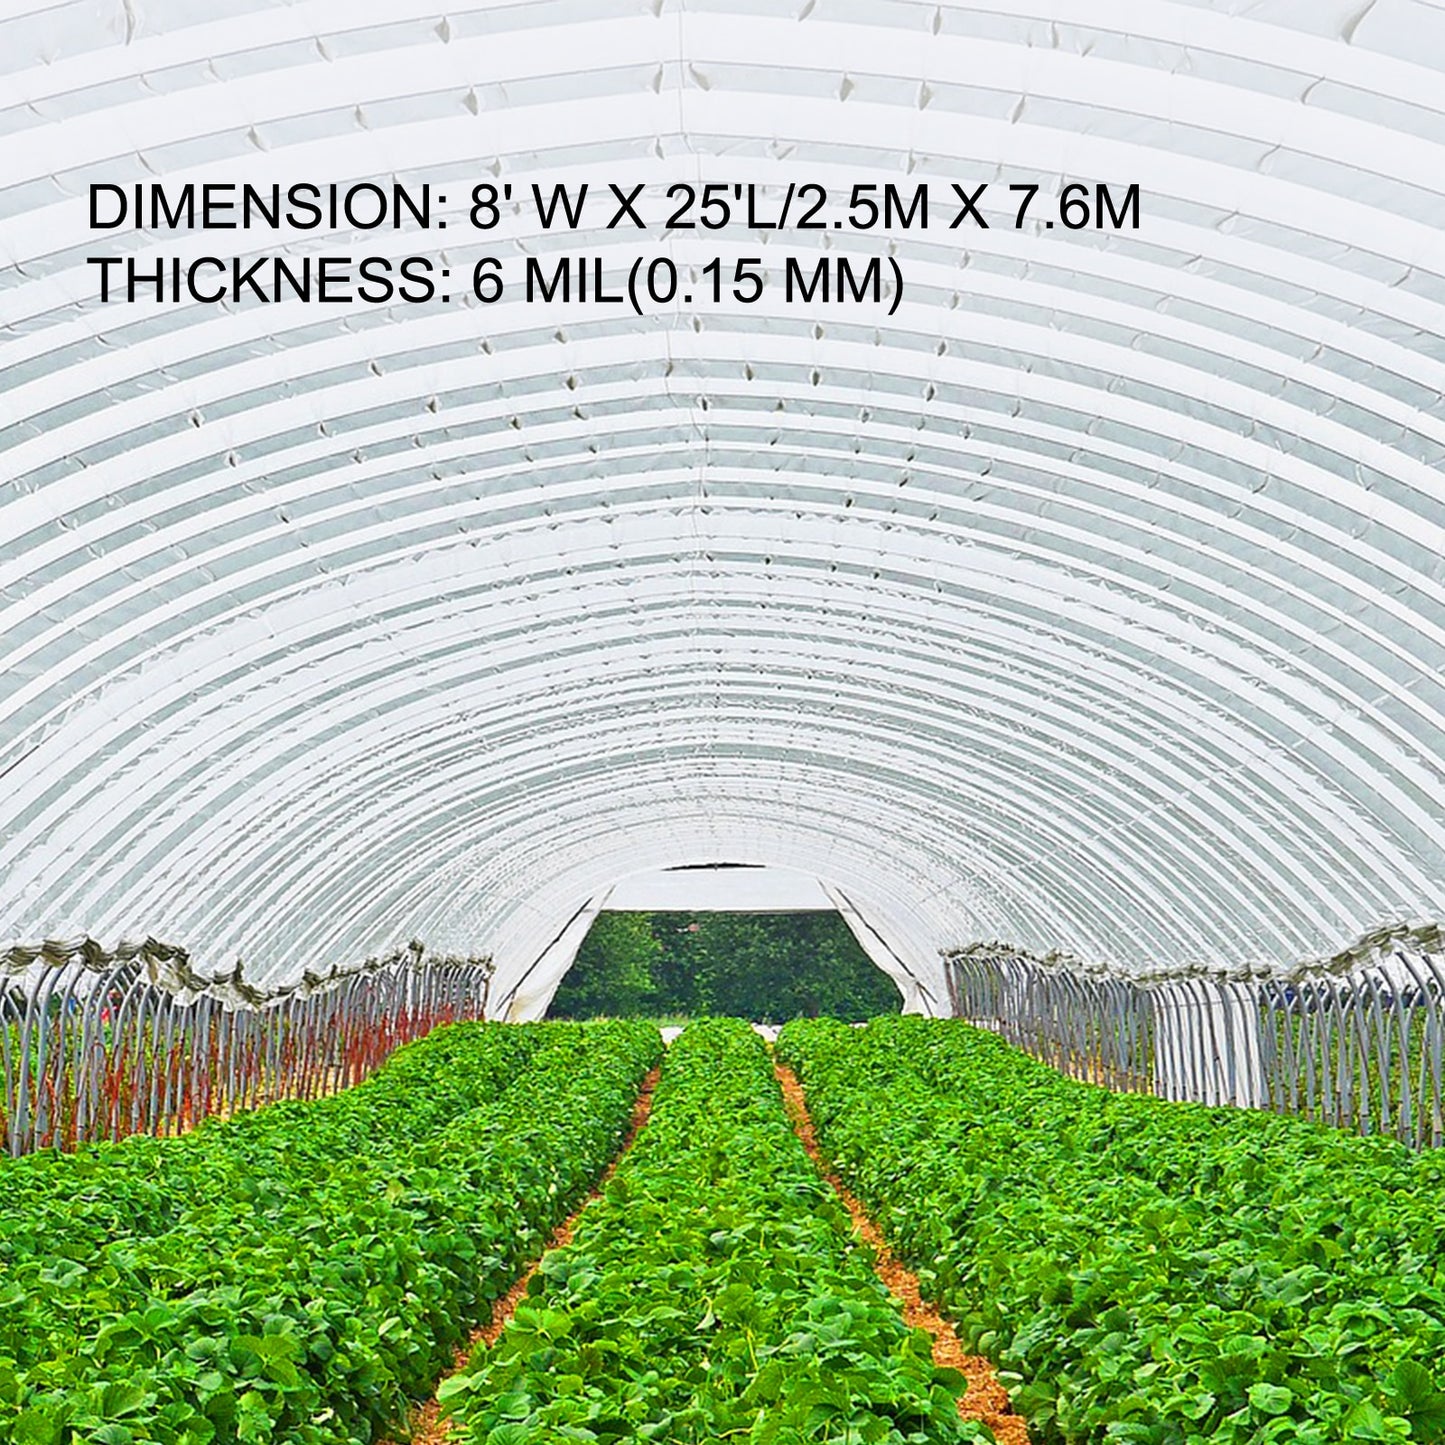 VEVOR Agricultural Greenhouse Film Clear Plastic Farm Crops Vegetable Cover UV Resistant Polyethylene Covering Plants Flowers - youronestopstore23